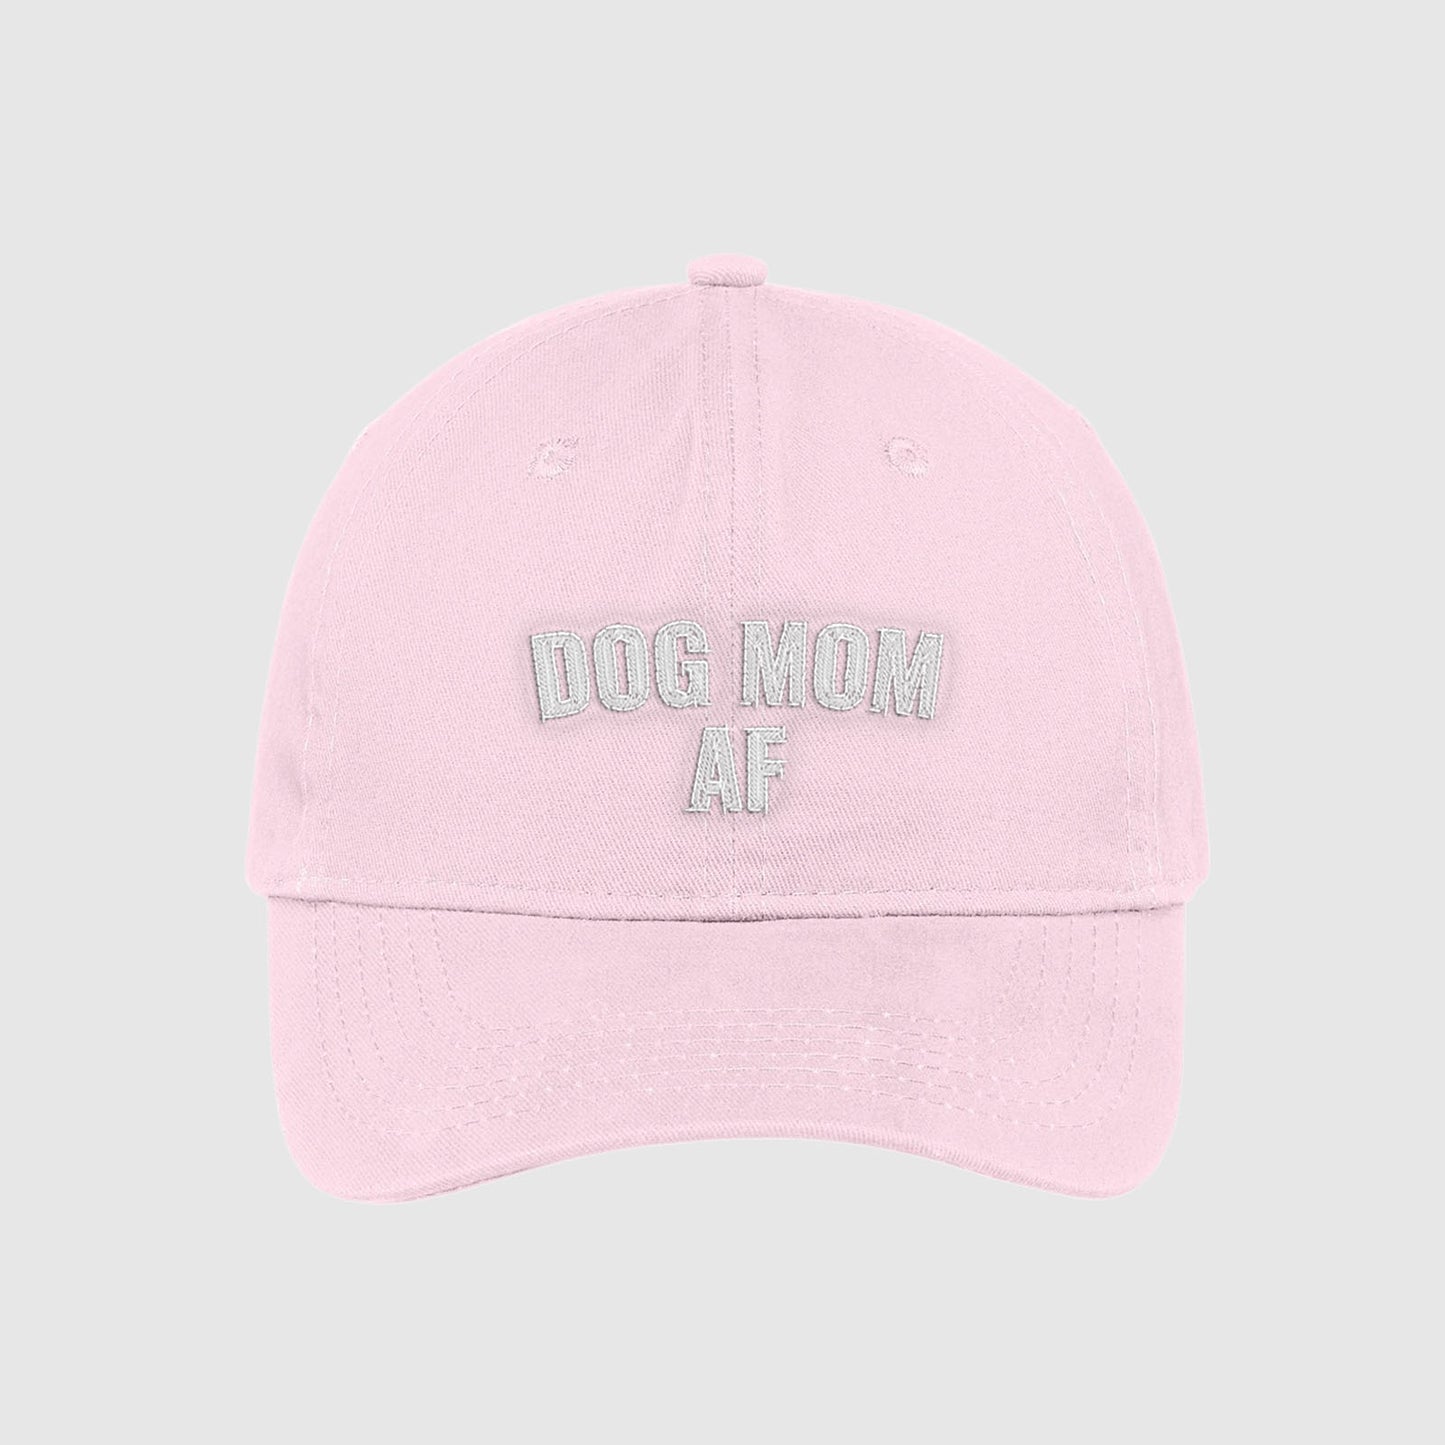 Blush pink Dog Mom AF Hat embroidered with white text.